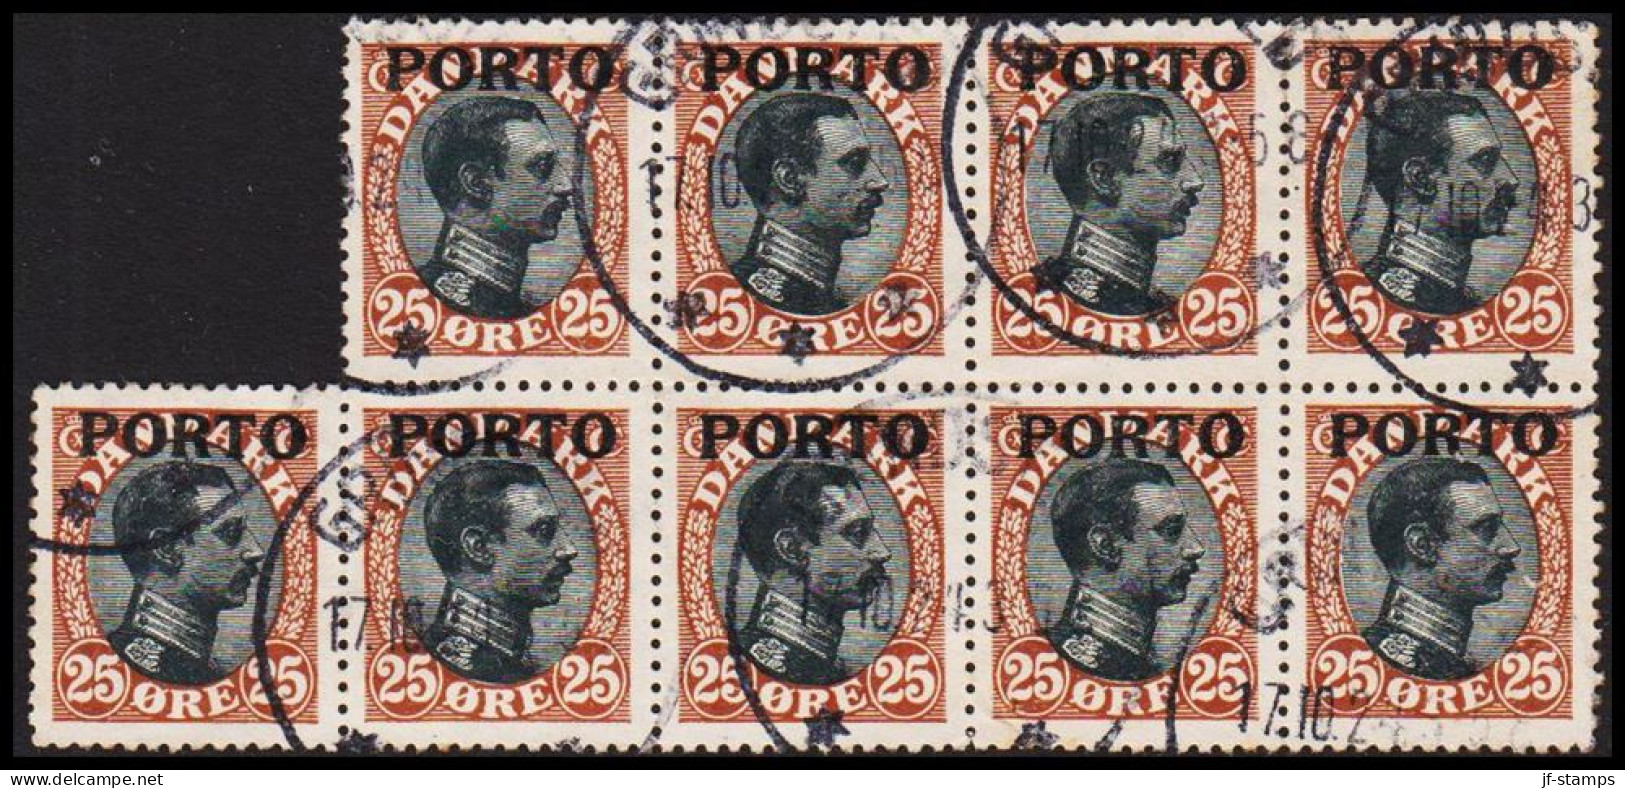 1923. DANMARK. Postage Due. Porto. Chr. X. 25 Øre Brown/black In 9block Cancelled GRINDSTED 17... (Michel P6) - JF545126 - Port Dû (Taxe)